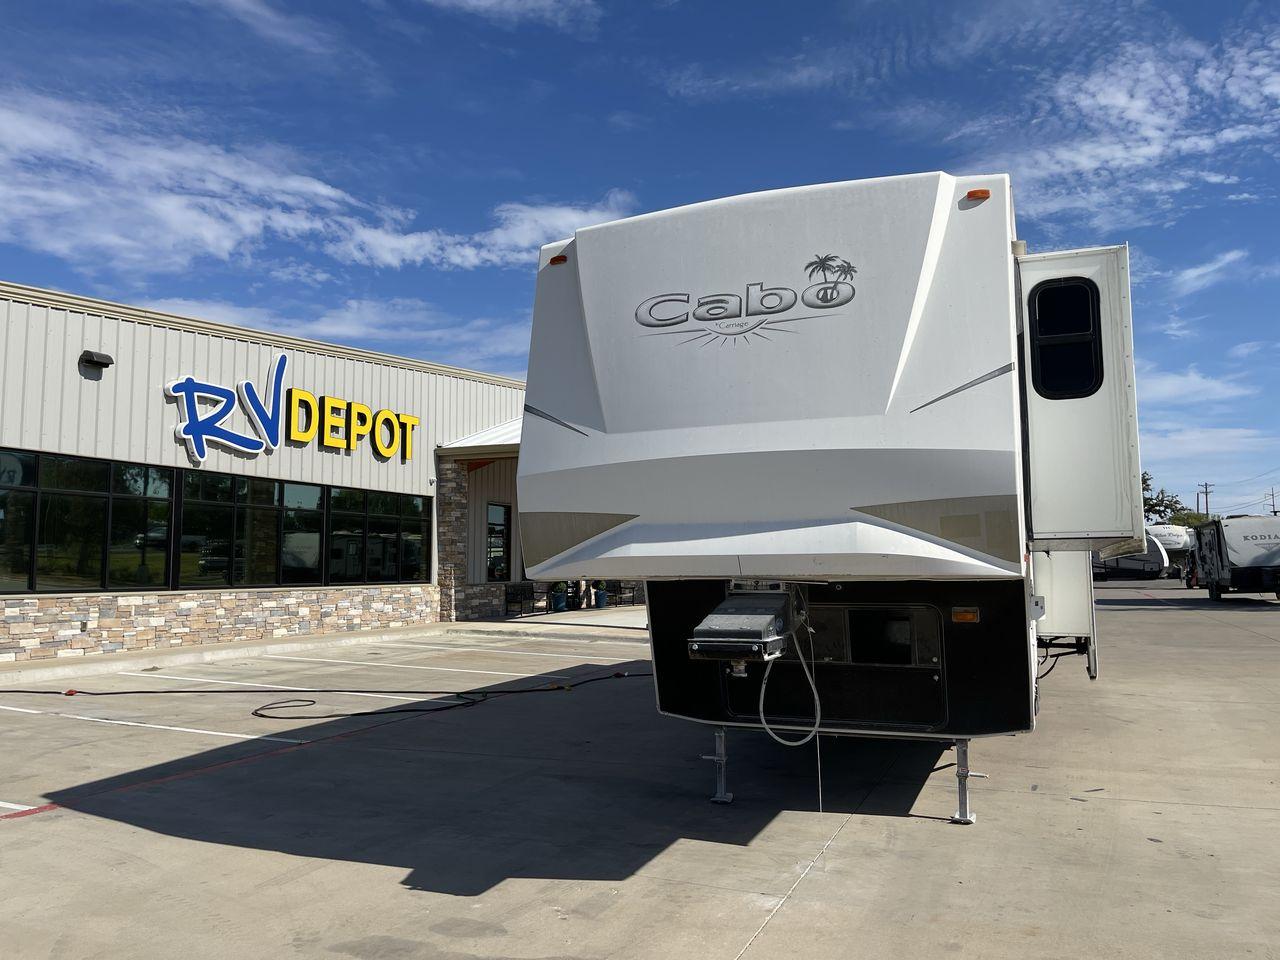 2011 WHITE CARRIAGE CABO 361 - (16F62G4R9B1) , Length: 36.92 ft. | Dry Weight: 11,275 lbs. | Slides: 3 transmission, located at 4319 N Main Street, Cleburne, TX, 76033, (817) 221-0660, 32.435829, -97.384178 - This 2011 Carriage Cabo 361 fifth wheel measures just under 37' in length. It is a dual axle setup with a dry weight of 11,275 lbs and a carrying capacity of 3,724 lbs. With three slides, this fifth wheel is spacious! The Columbus's exterior is made from fiberglass, finished in white with tan graphi - Photo #0